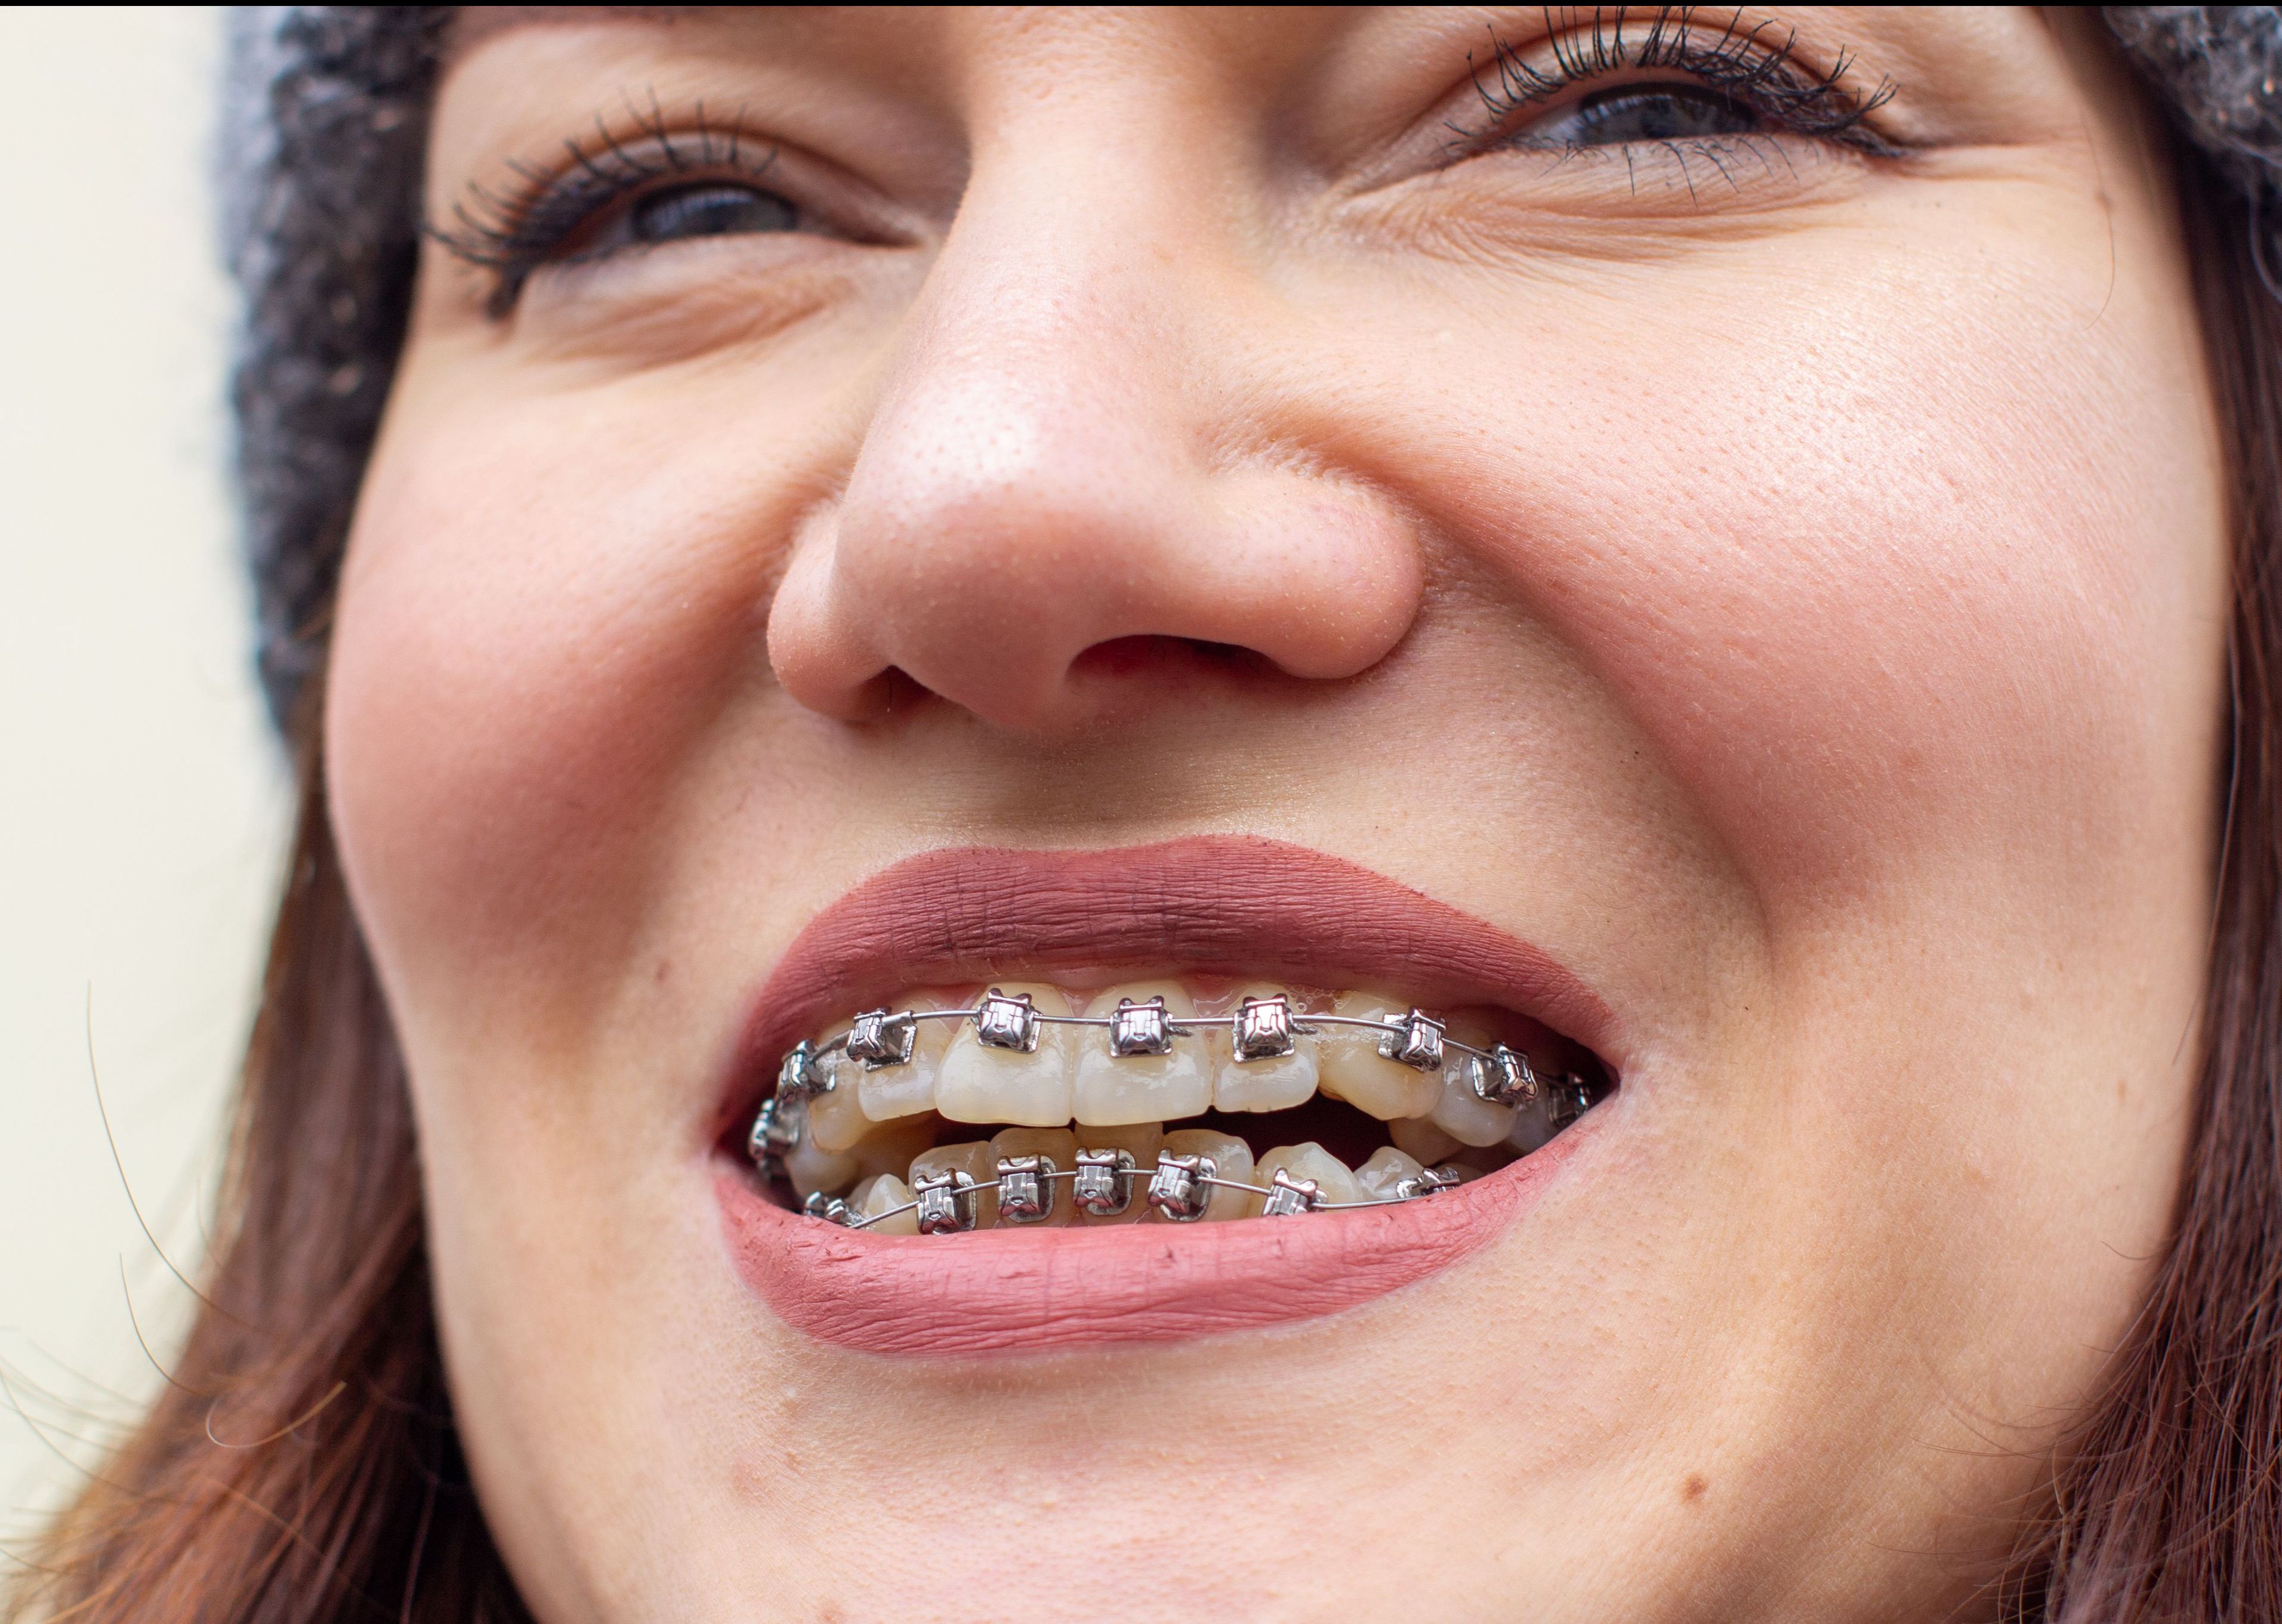 What Types of Braces Work Best for An Overbite?